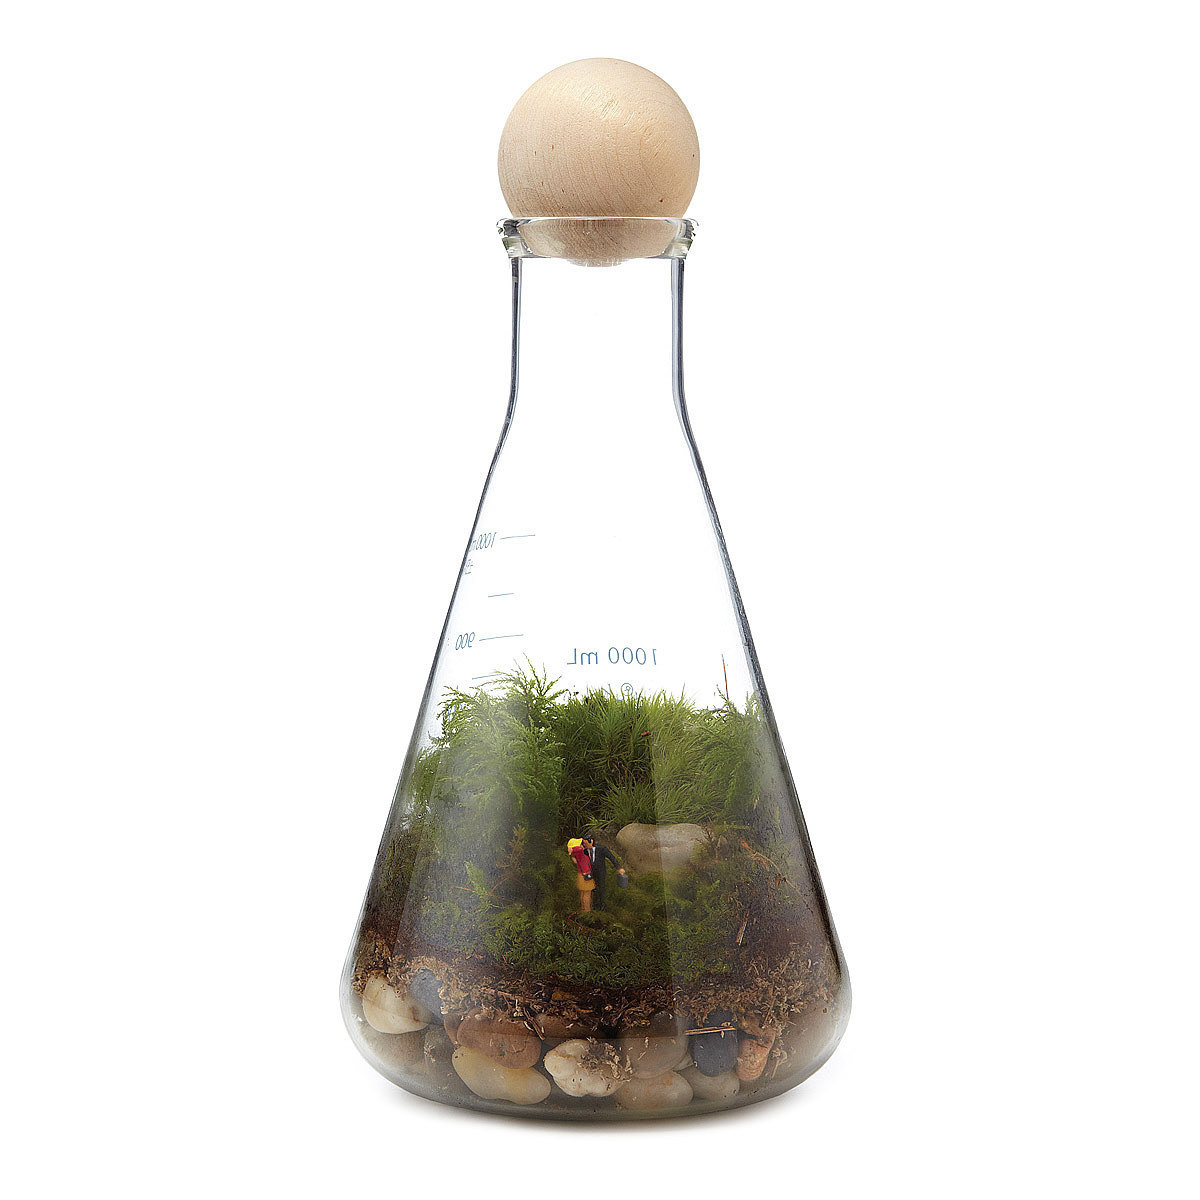 A hand-assembled We Have Chemistry Terrarium celebrates love in an adorable and quirky way.